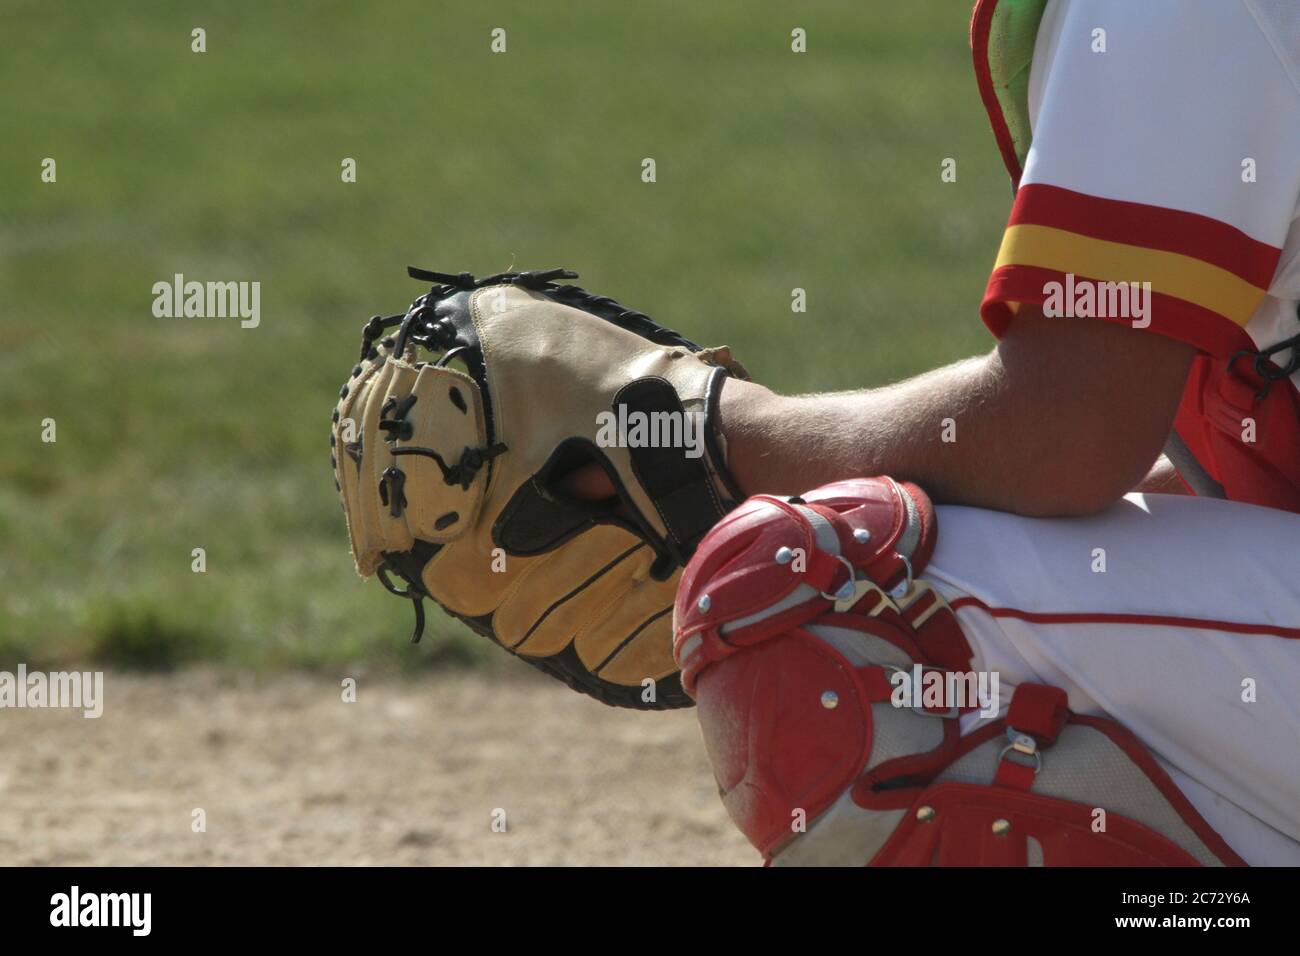 A baseball catcher is ready to receive a pitch. Room for copy on the left side of the frame. Stock Photo